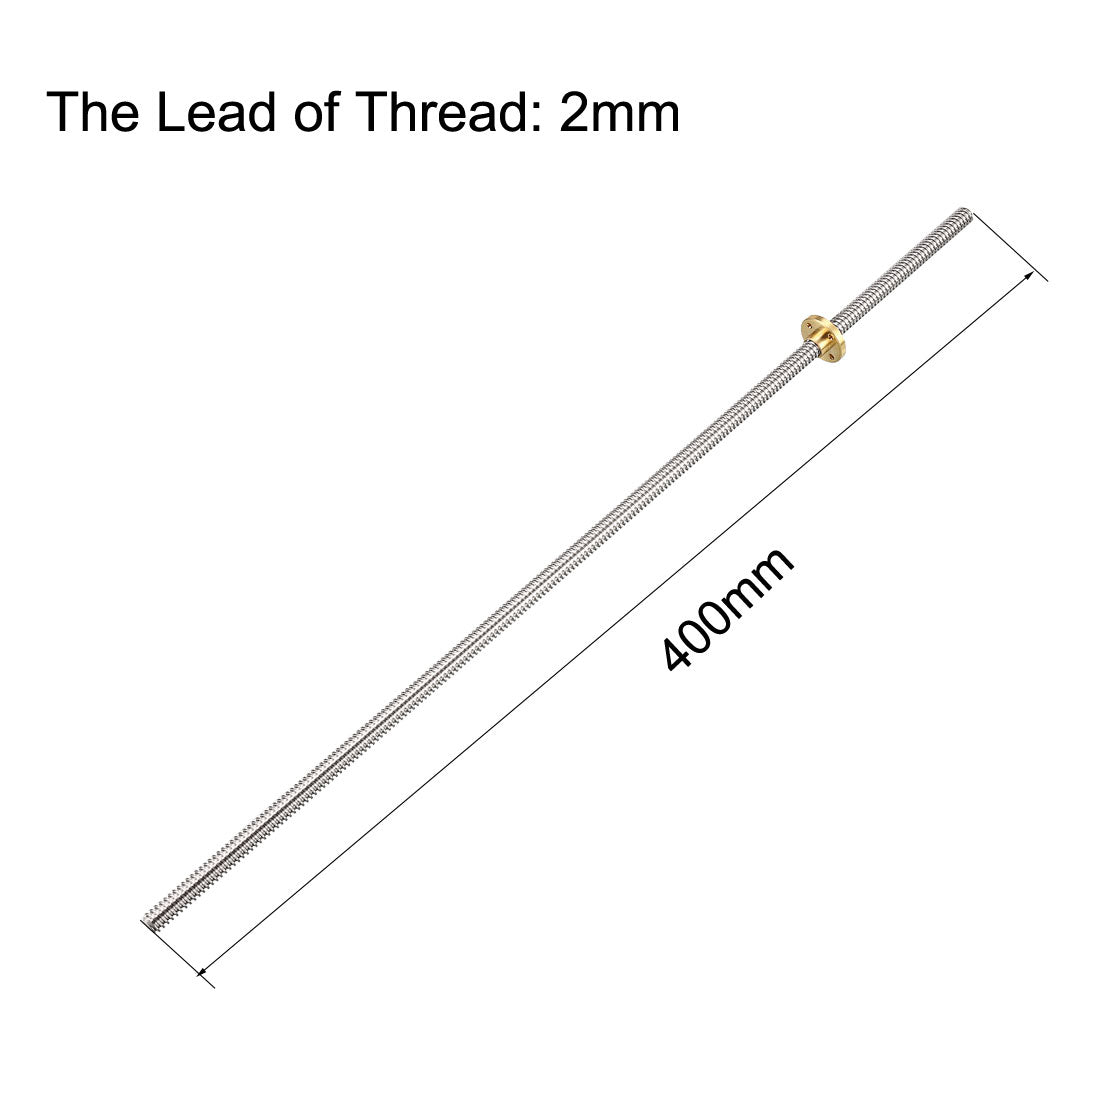 uxcell Uxcell 400mm T8 Pitch 2mm Lead 2mm Lead Screw Rod with Copper Nut for 3D Printer